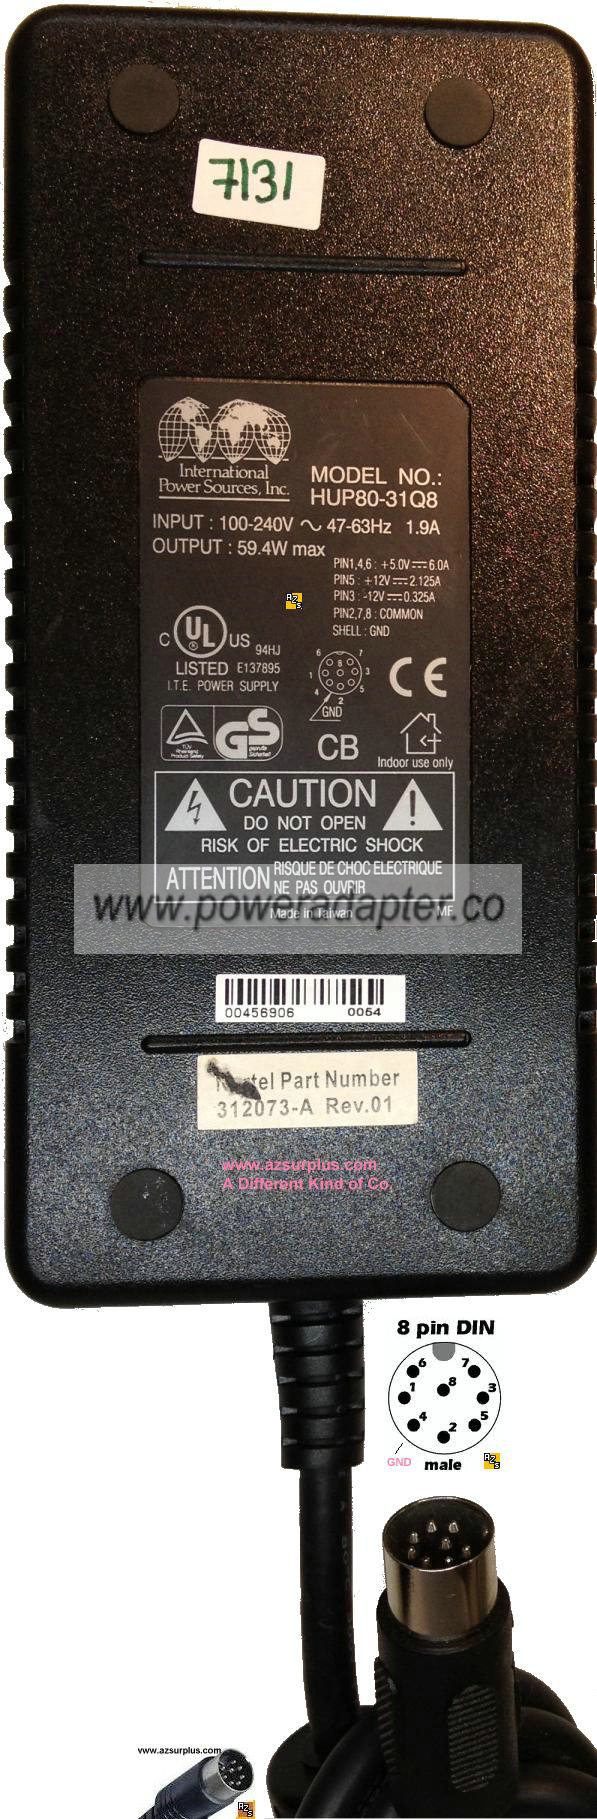 INTERNATIONAL POWER SOURCE HUP80-31Q8 AC ADAPTER 5VDC 6A 12V 2.1 - Click Image to Close